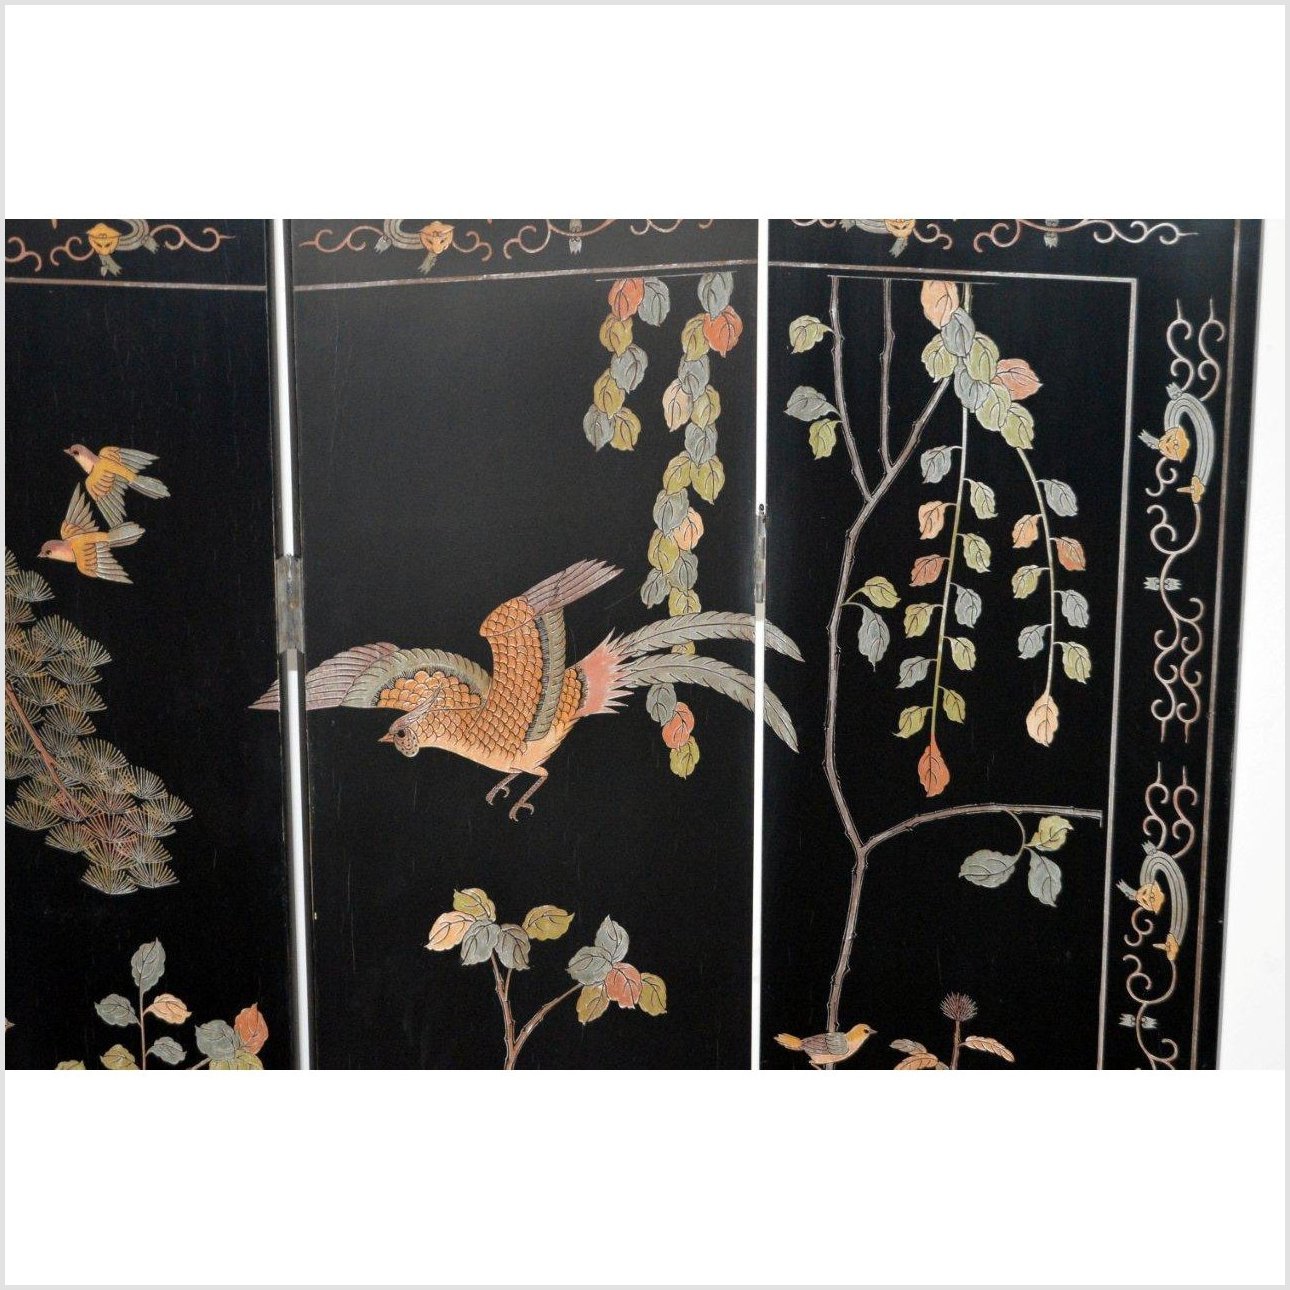 4-Panel Black Screen with Chinoiseries of Flowers, Trees and Birds-YN2893-4. Asian & Chinese Furniture, Art, Antiques, Vintage Home Décor for sale at FEA Home